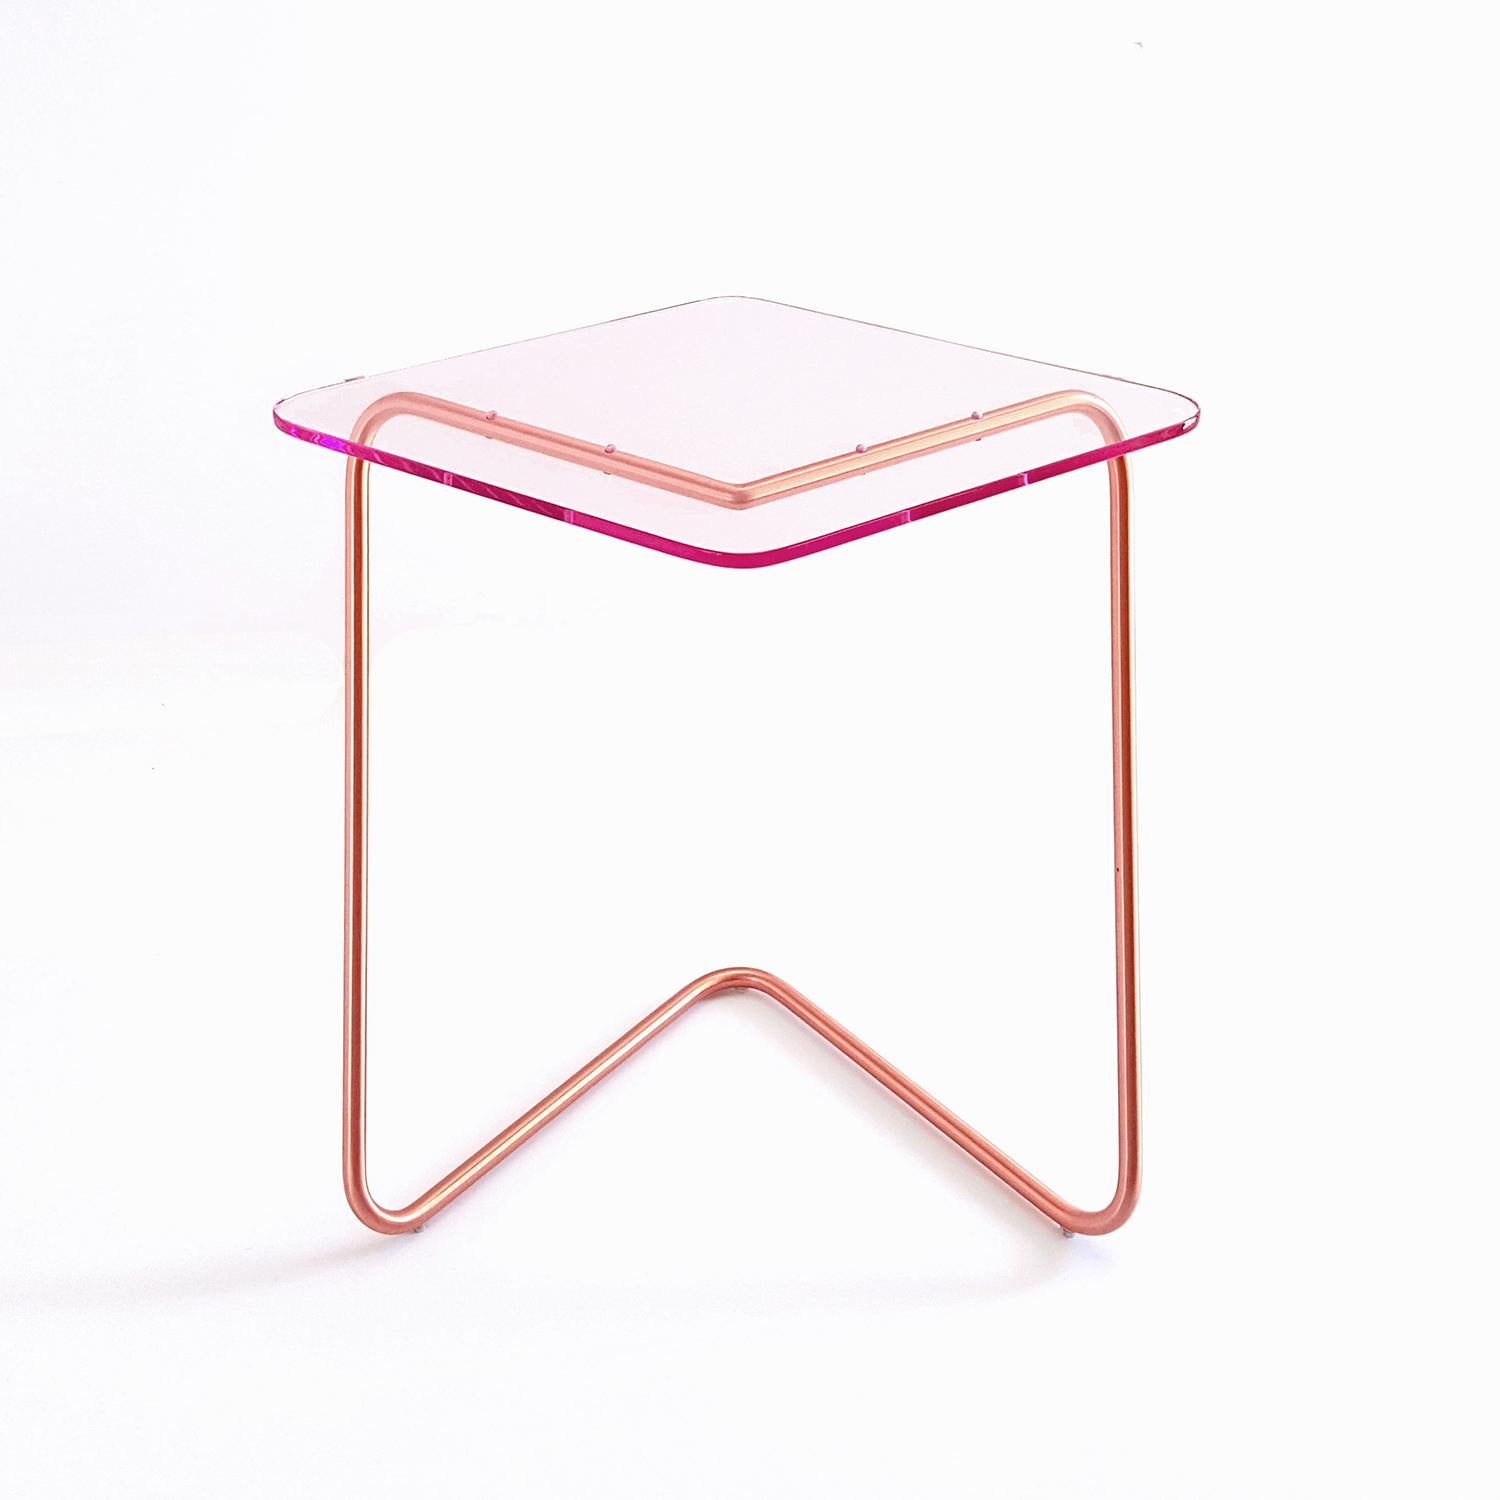 The Diamond side table by Rita Kettaneh 
Dimensions: The base: brushed stainless steel plated with copper
 optionally plated with copper or brass
 The top: acrylic
Materials: H 42 x W 45 x D 34.5 cm
Weight: 2.65 Kg

Colors and finishes: